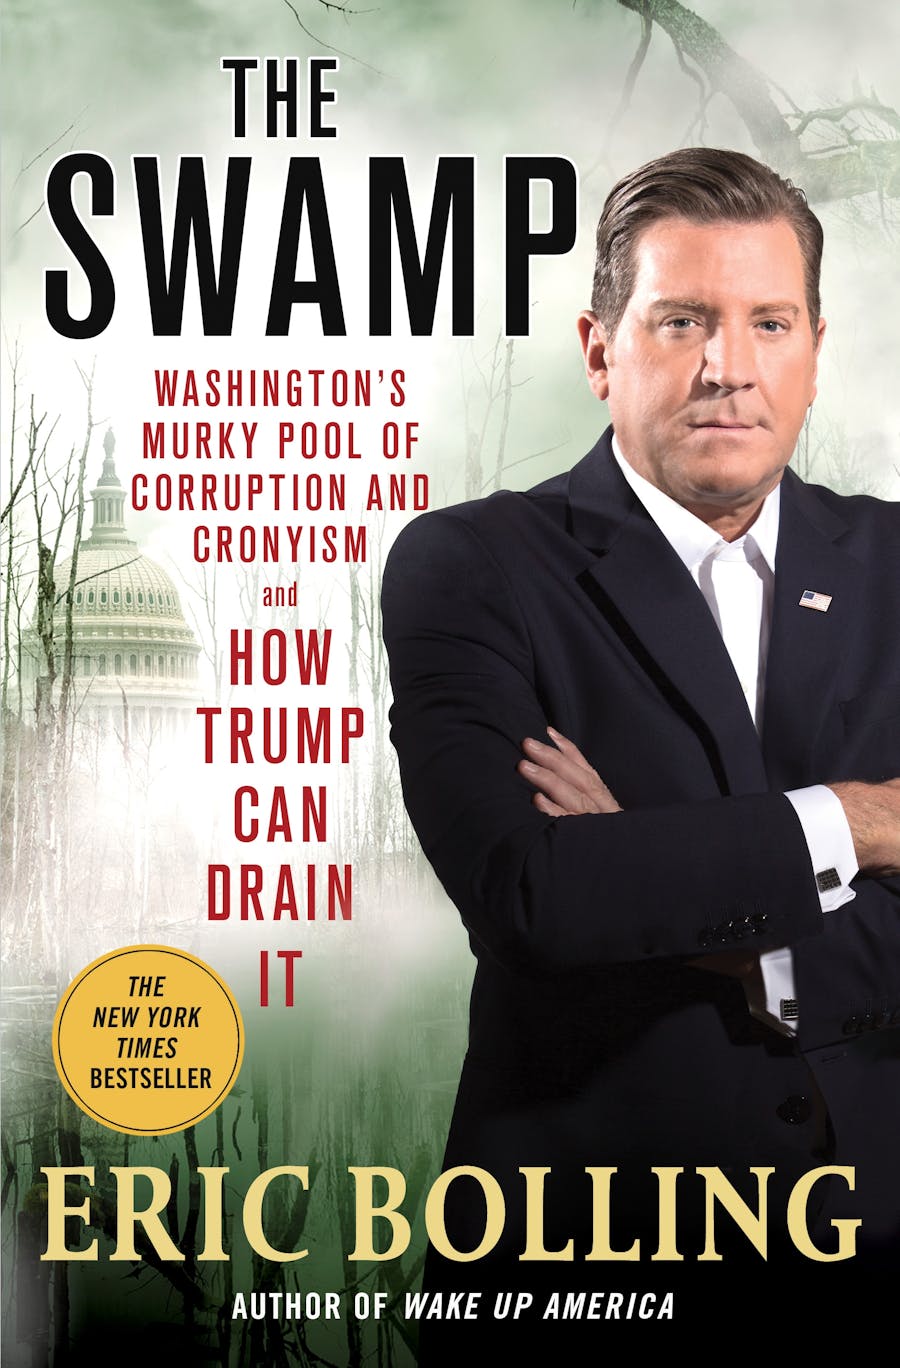 Eric Bolling, Author of The Swamp:Washington's Murky Pool of Corruption and Cronyism and How Trump Can Drain It